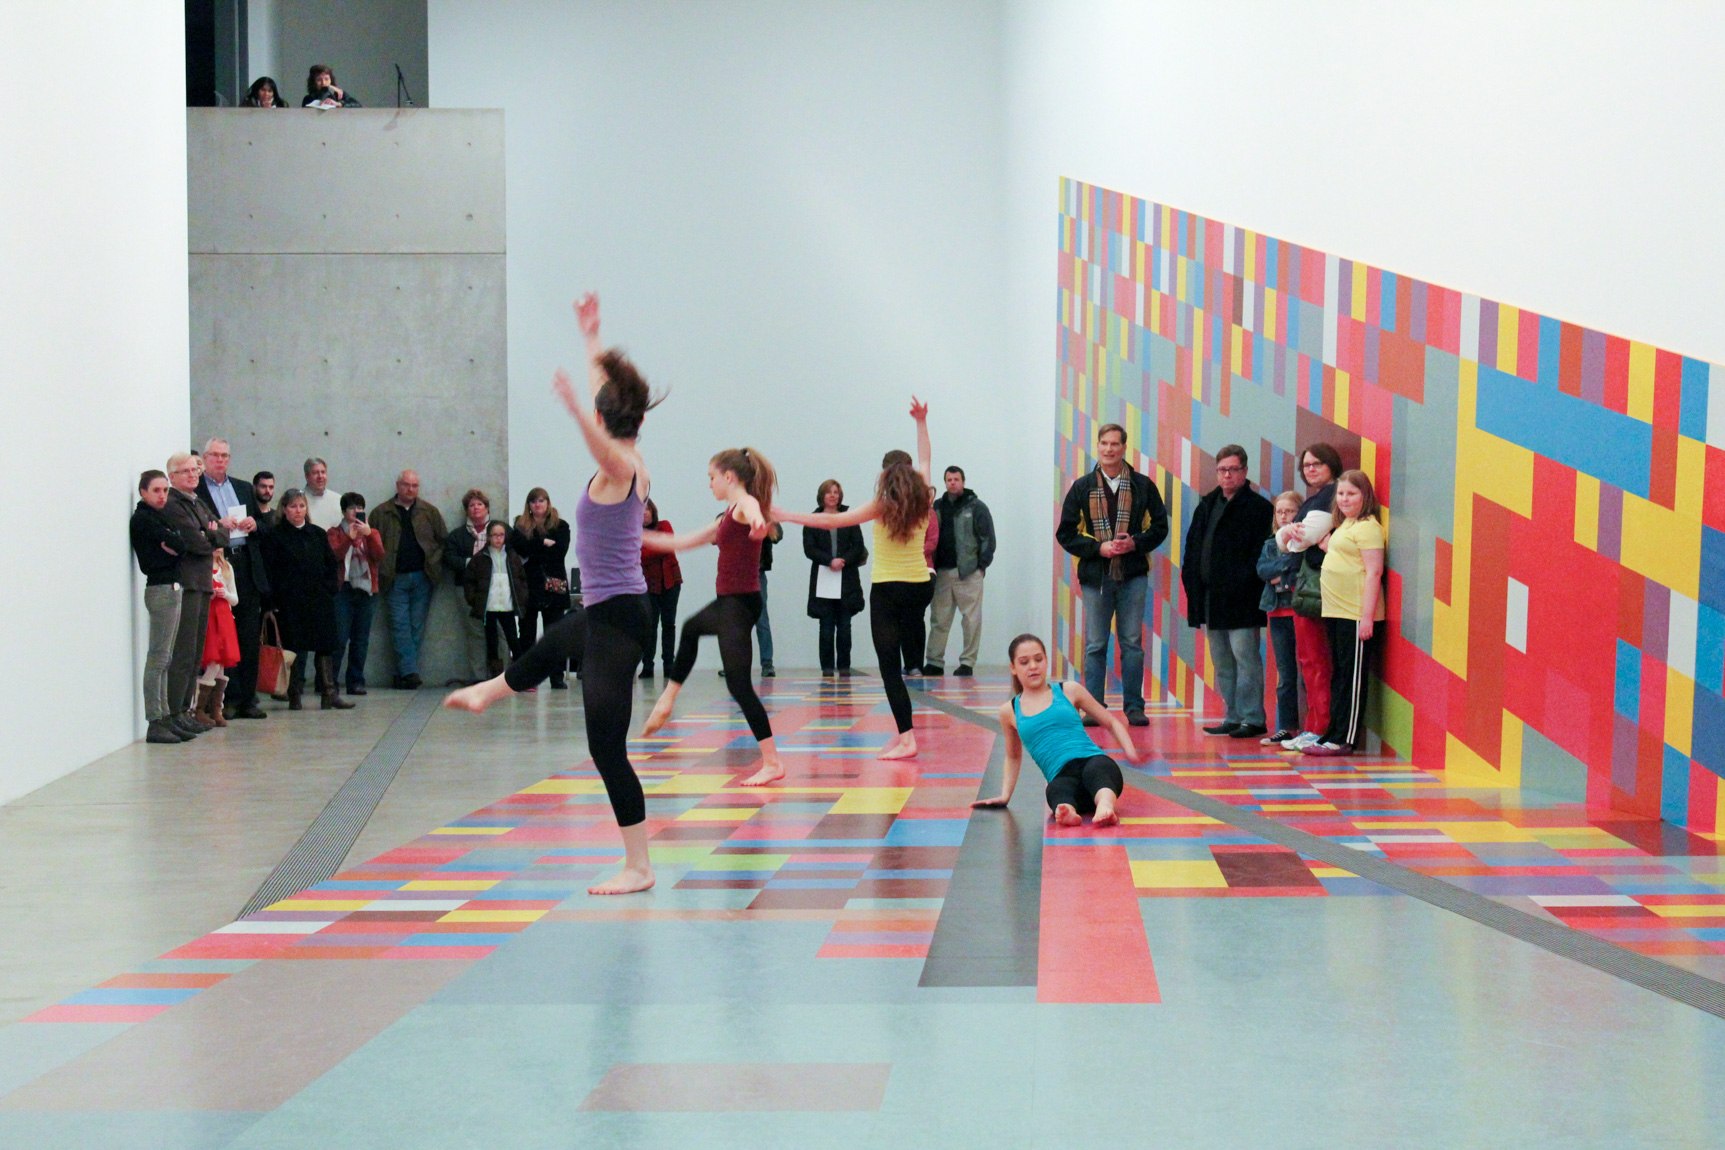 COCA dancers perform with David Scanavino's "Candy Crush" installation for an audience.